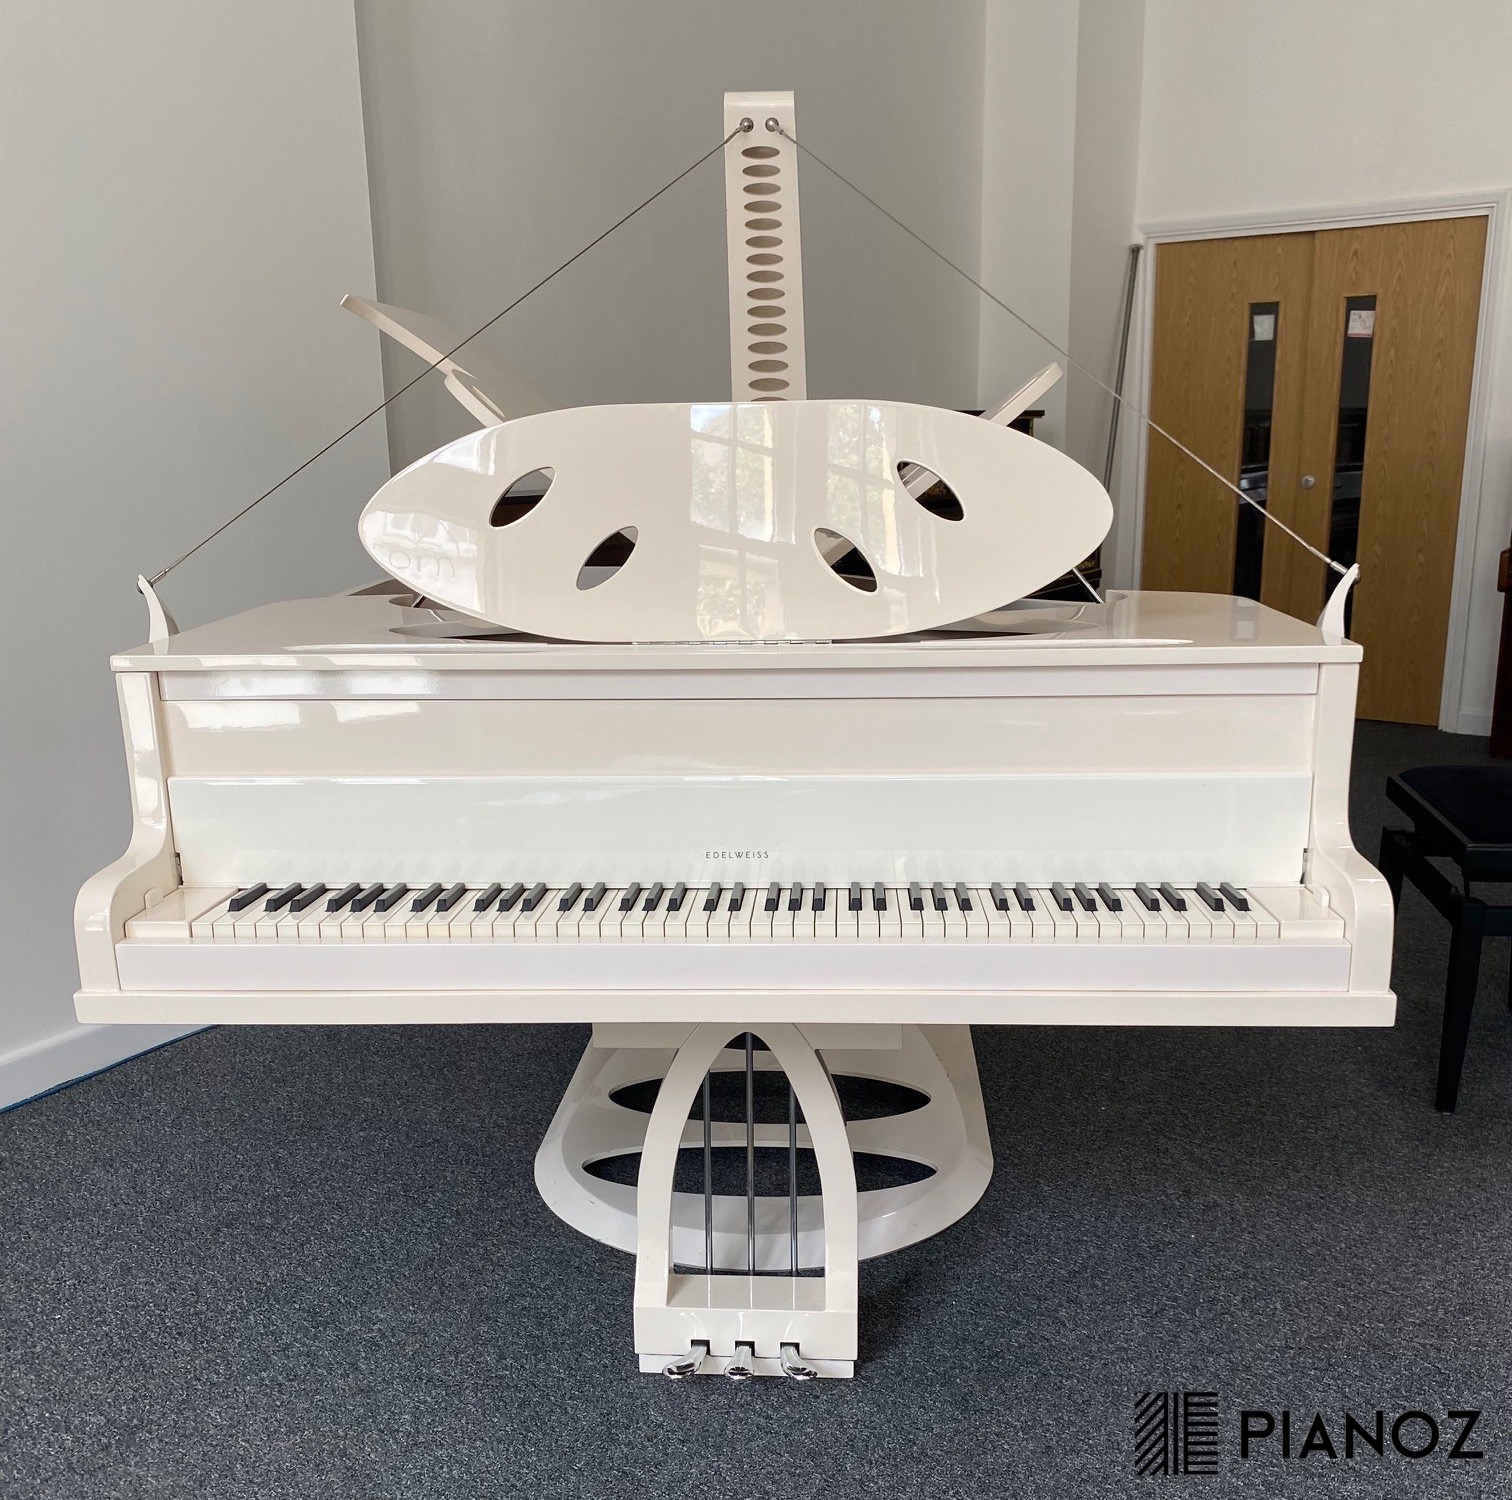 Edelweiss Pianodisc Self Playing Baby Grand Piano piano for sale in UK